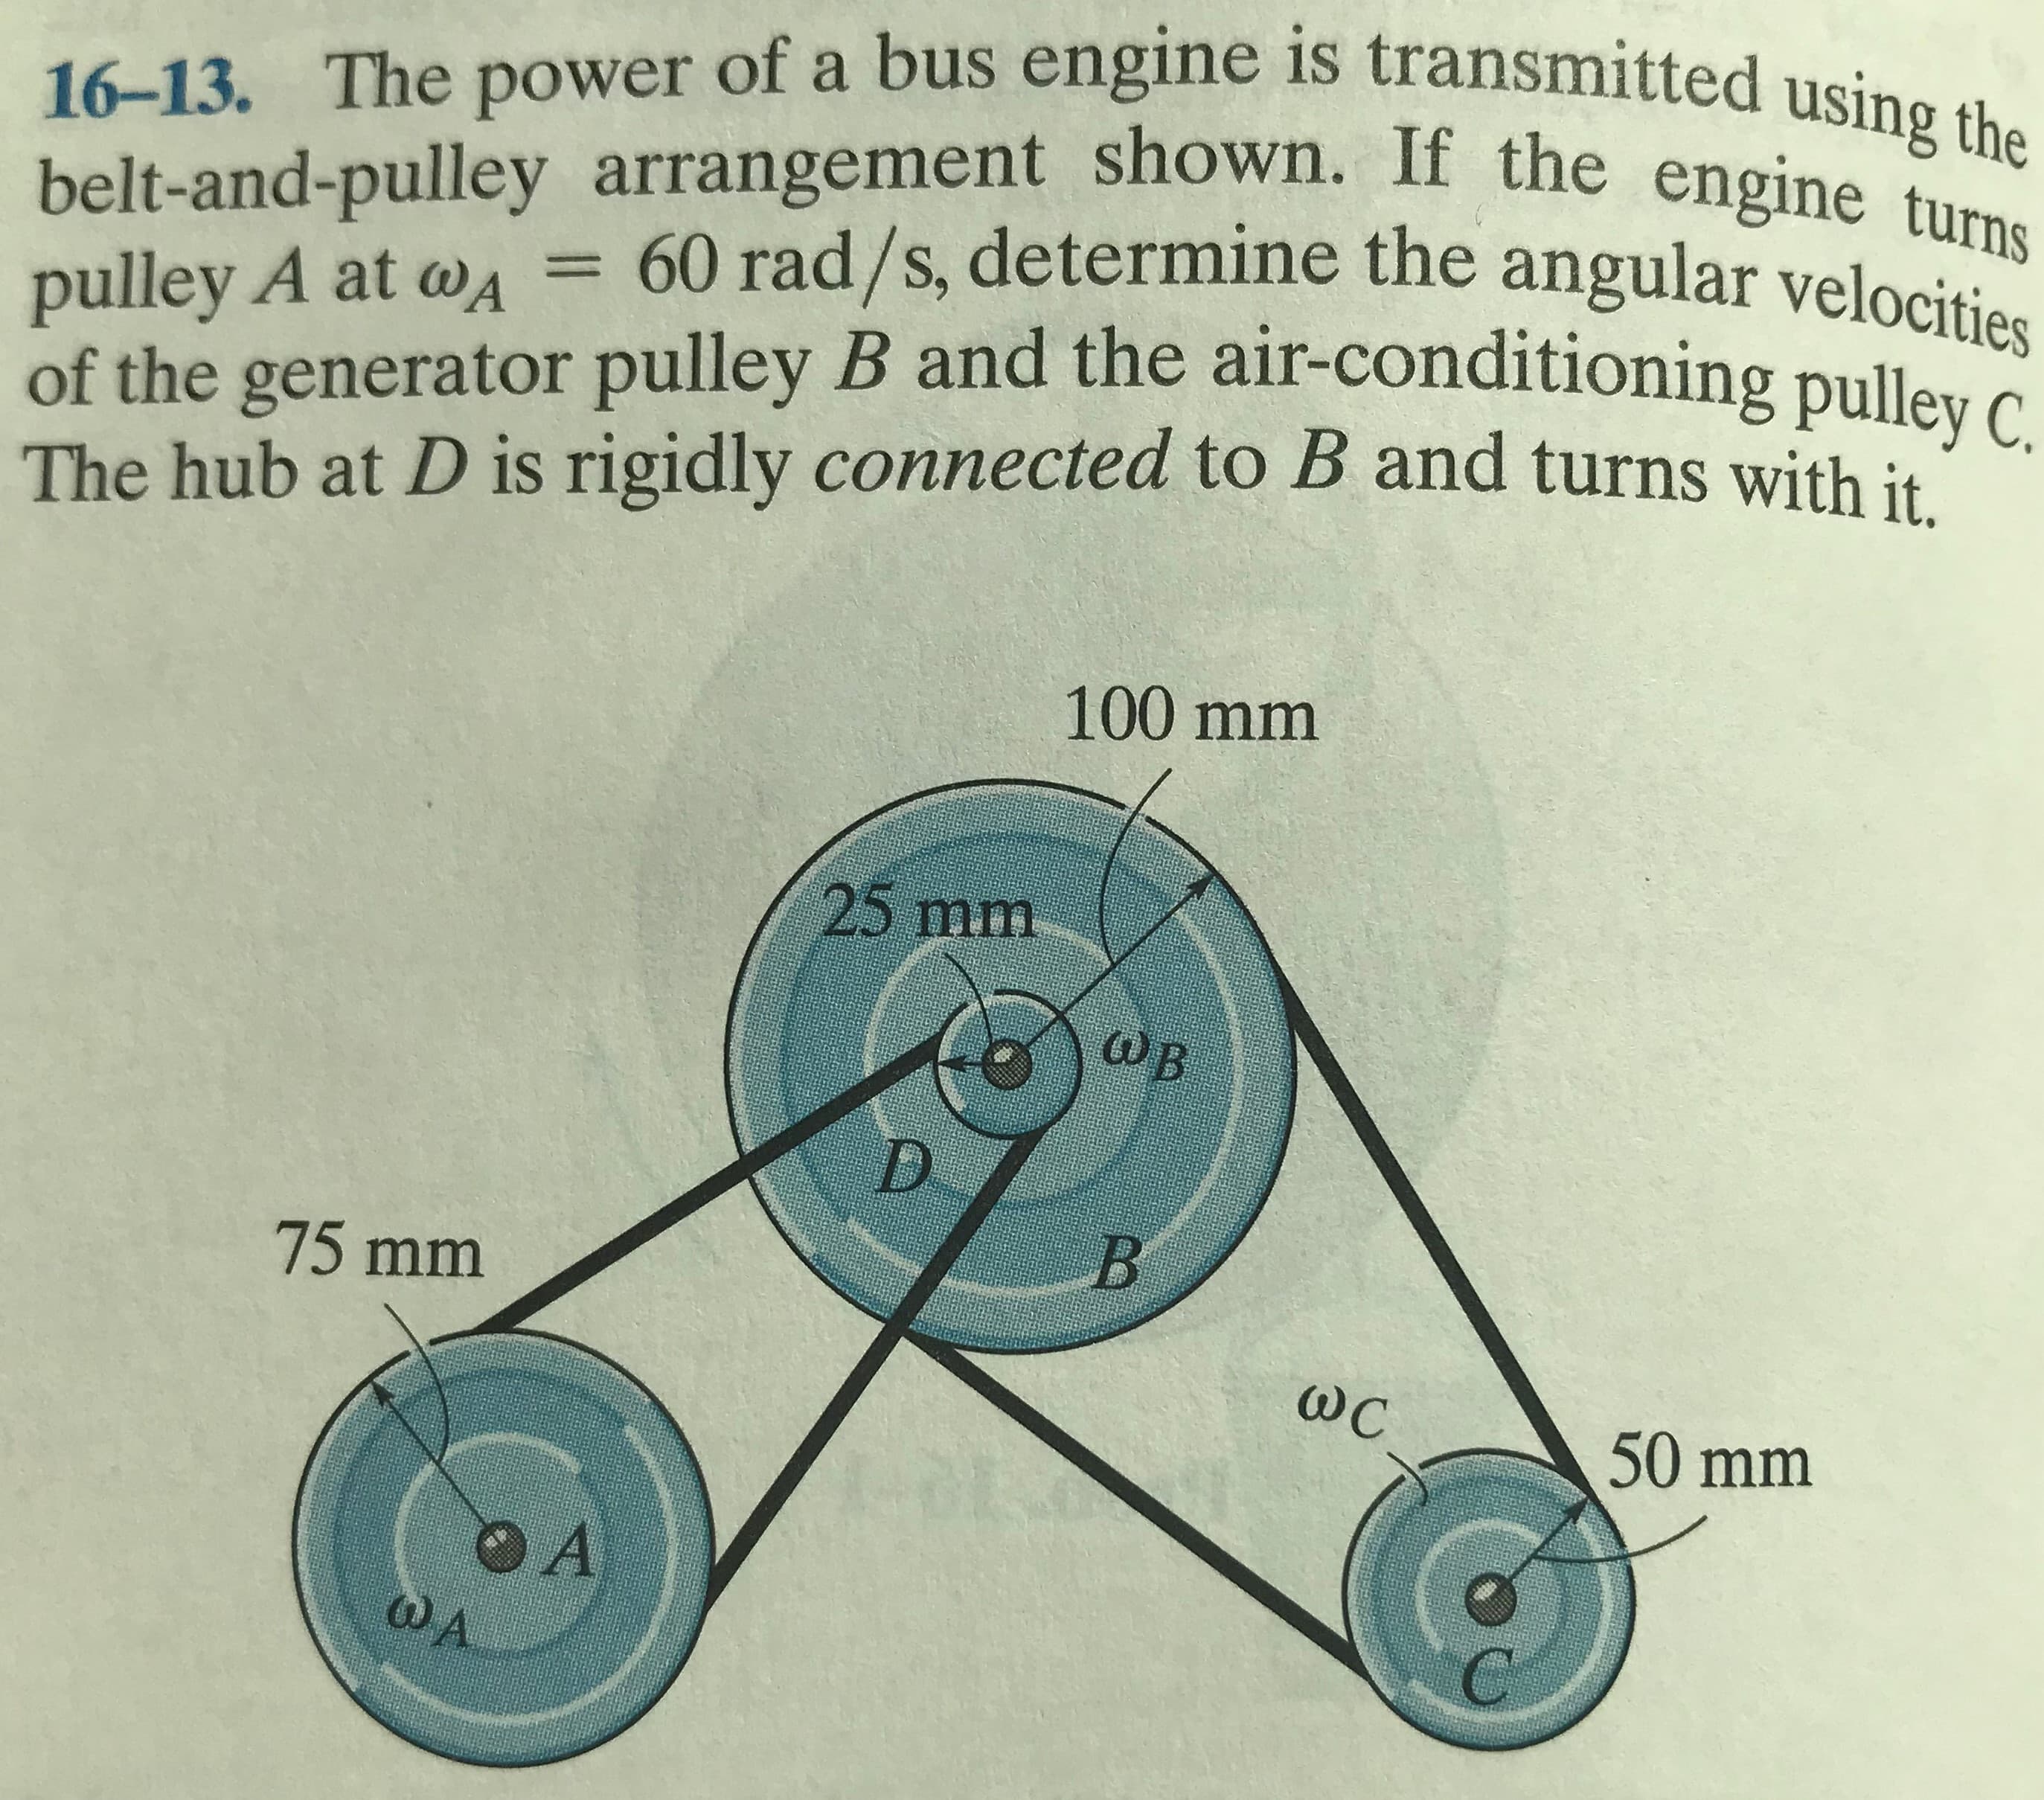 of a bus engine is transmitted using the
belt-and-pulley arrangement shown. If the engine turns
60 rad/s, determine the angular velocities
pulley A at wA
of the generator pulley B and the air-conditioning pulley C
The hub at D is rigidly connected to B and turns with it
%3D
100 mm
25 mm
ωΒ
D.
75 mm
ωC
50 mm
OA
WA
